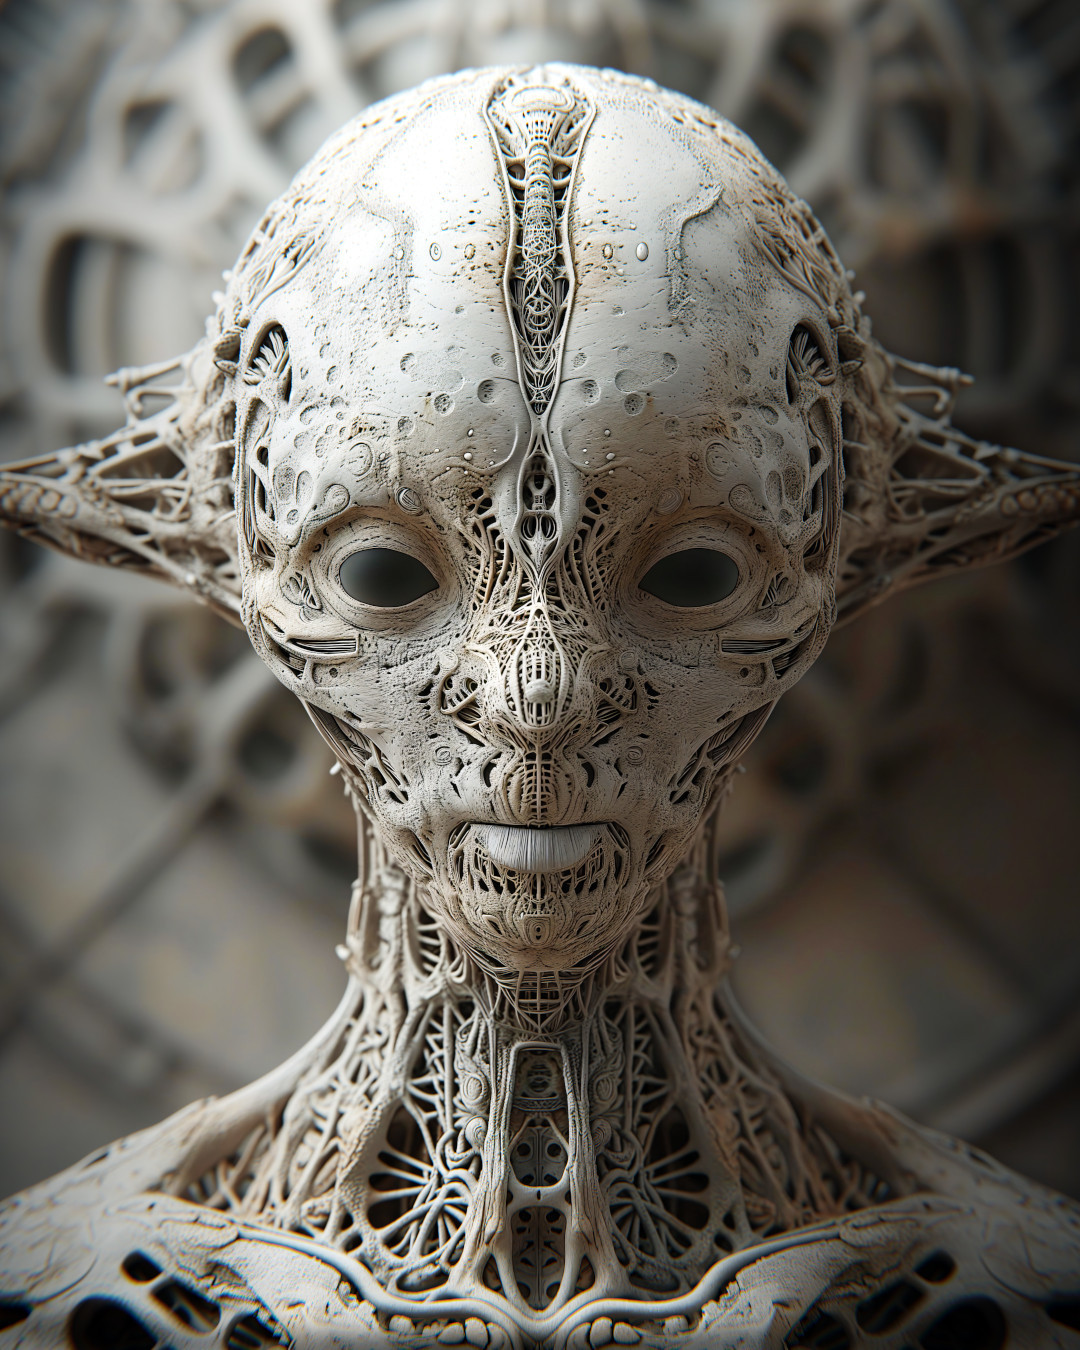 Curious alien, intricate textures, muted tones